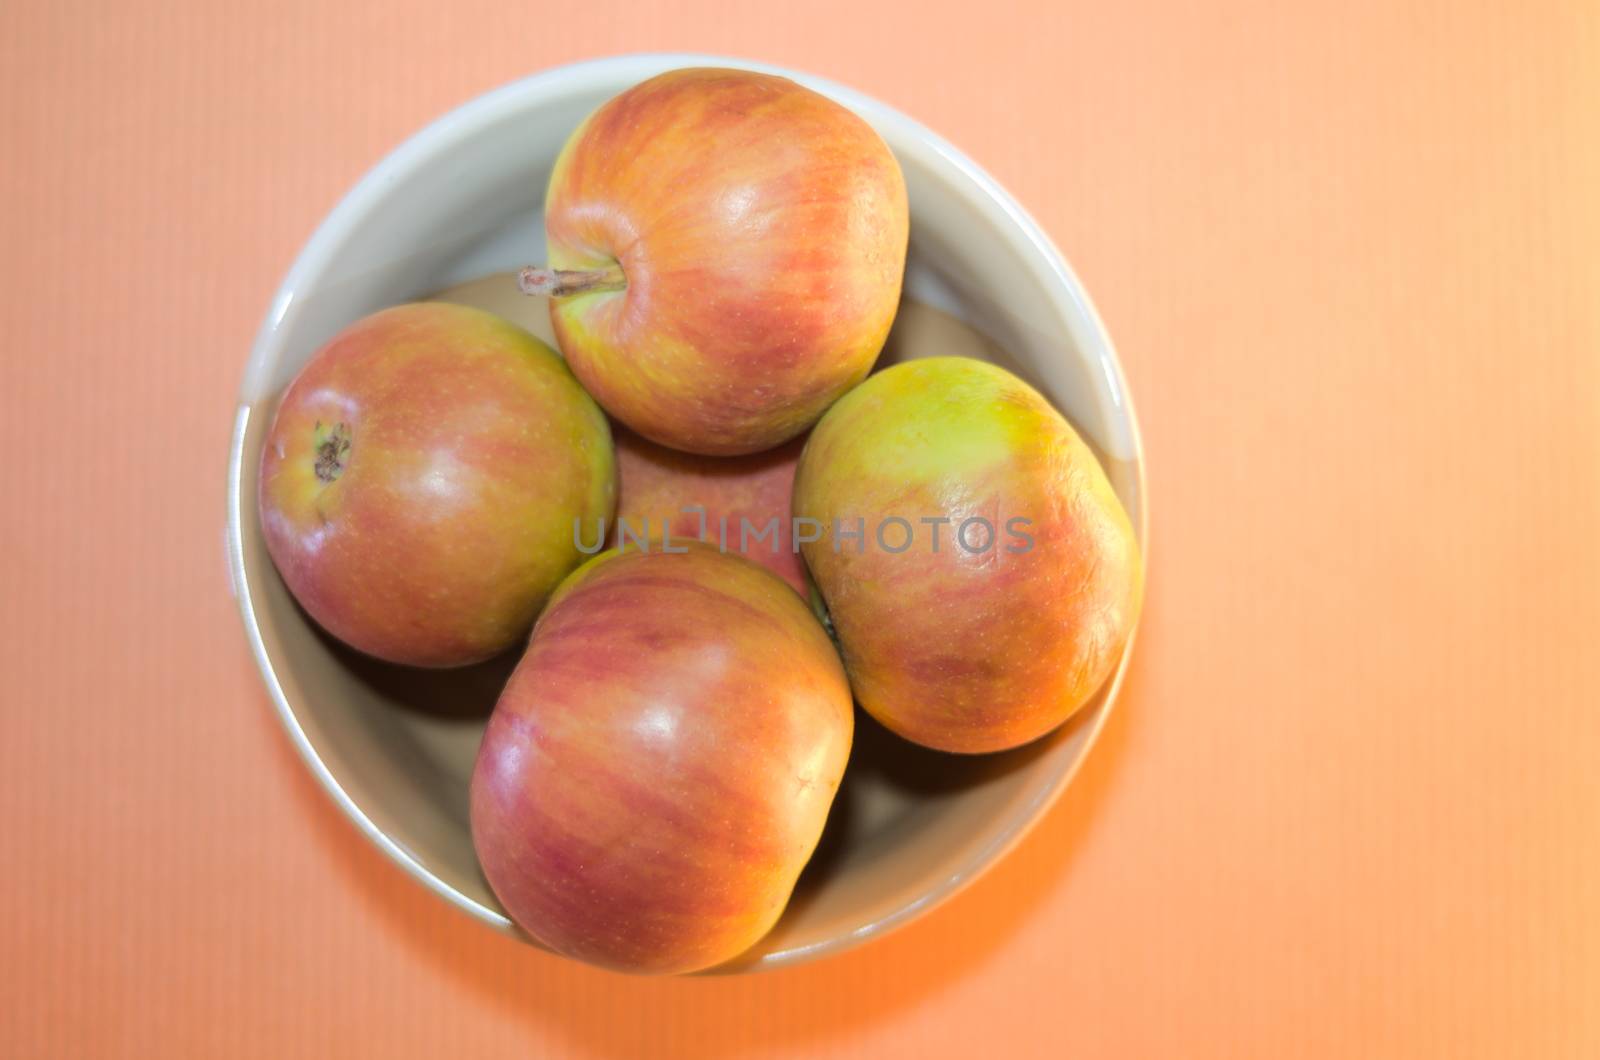 red-yellow summer apples in a light bowl on a pink background close-up top view